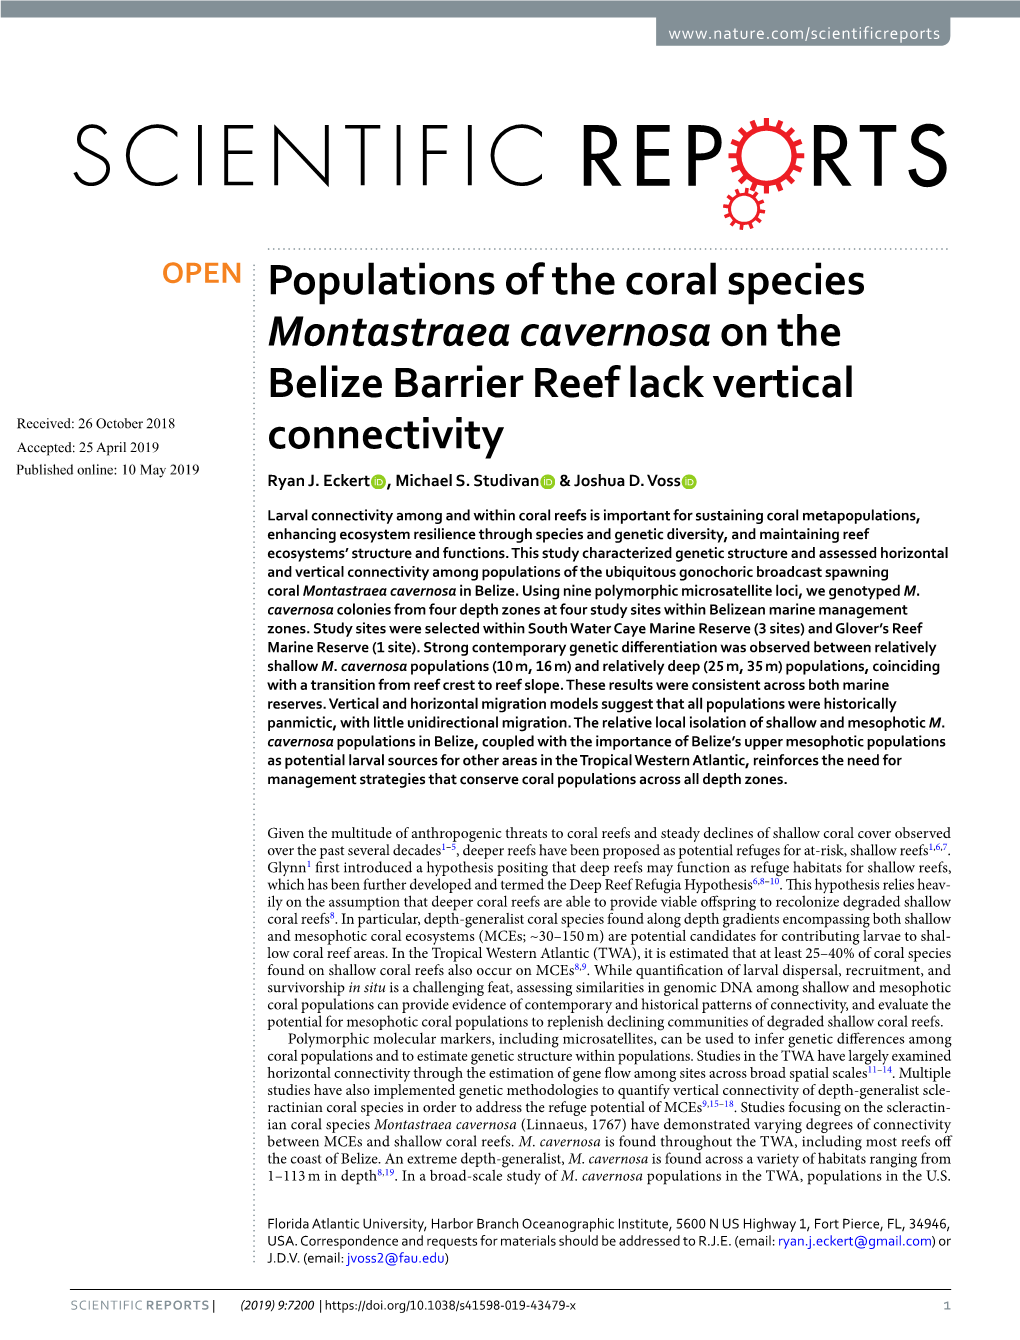 Populations of the Coral Species Montastraea Cavernosa on the Belize Barrier Reef Lack Vertical Connectivity